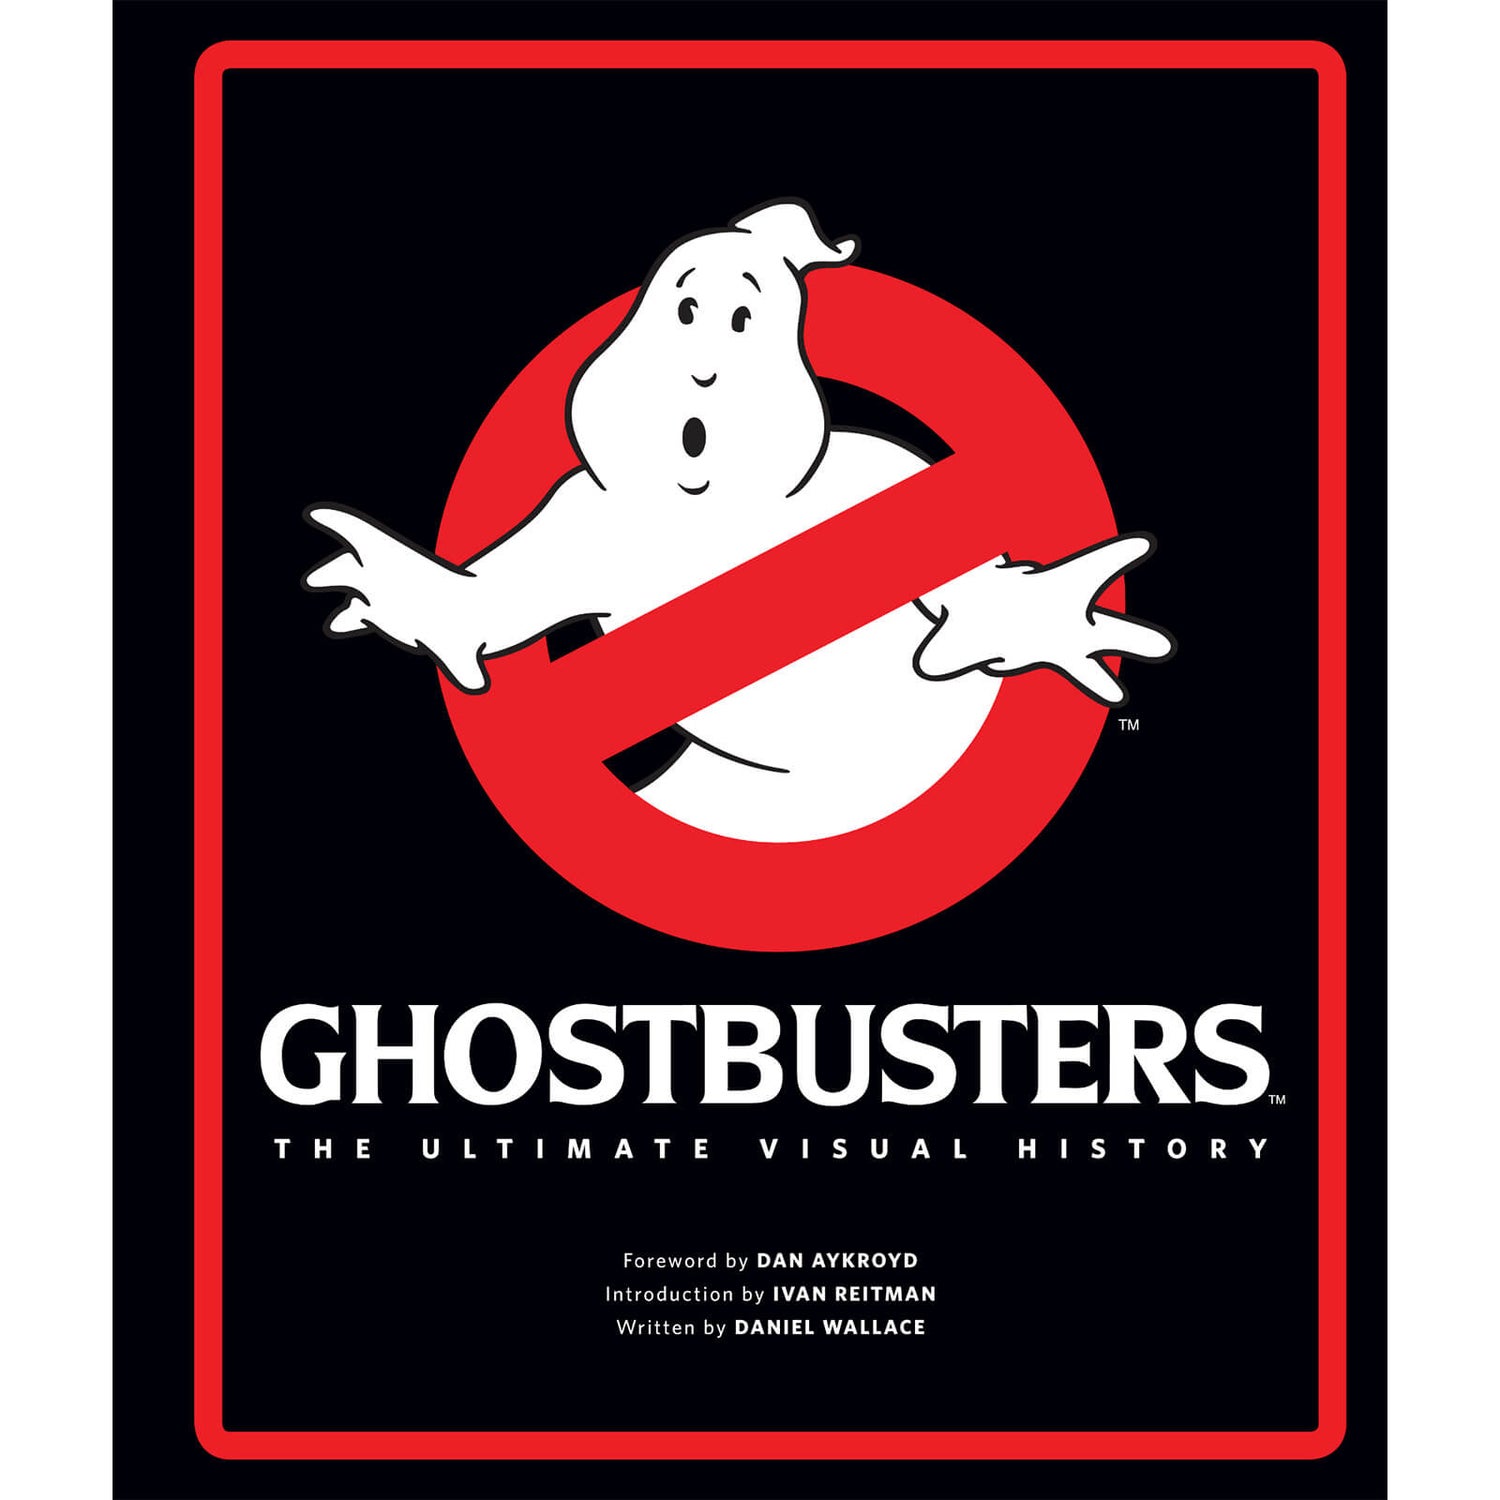 Ghostbusters The Ultimate Visual History